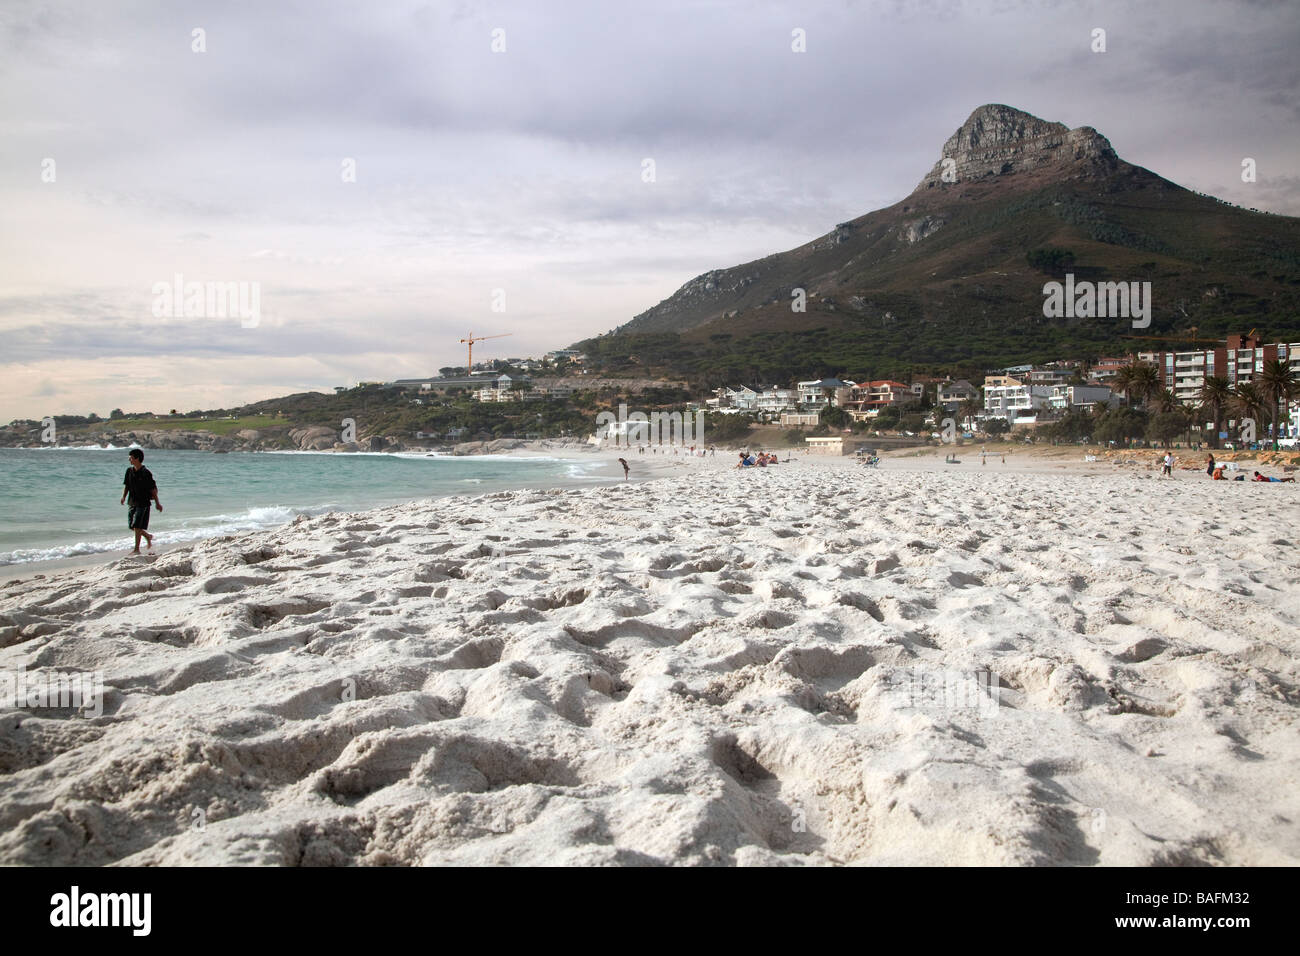 Boy playing in waves, Camps Bay, Cape Town, South Africa Stock Photo